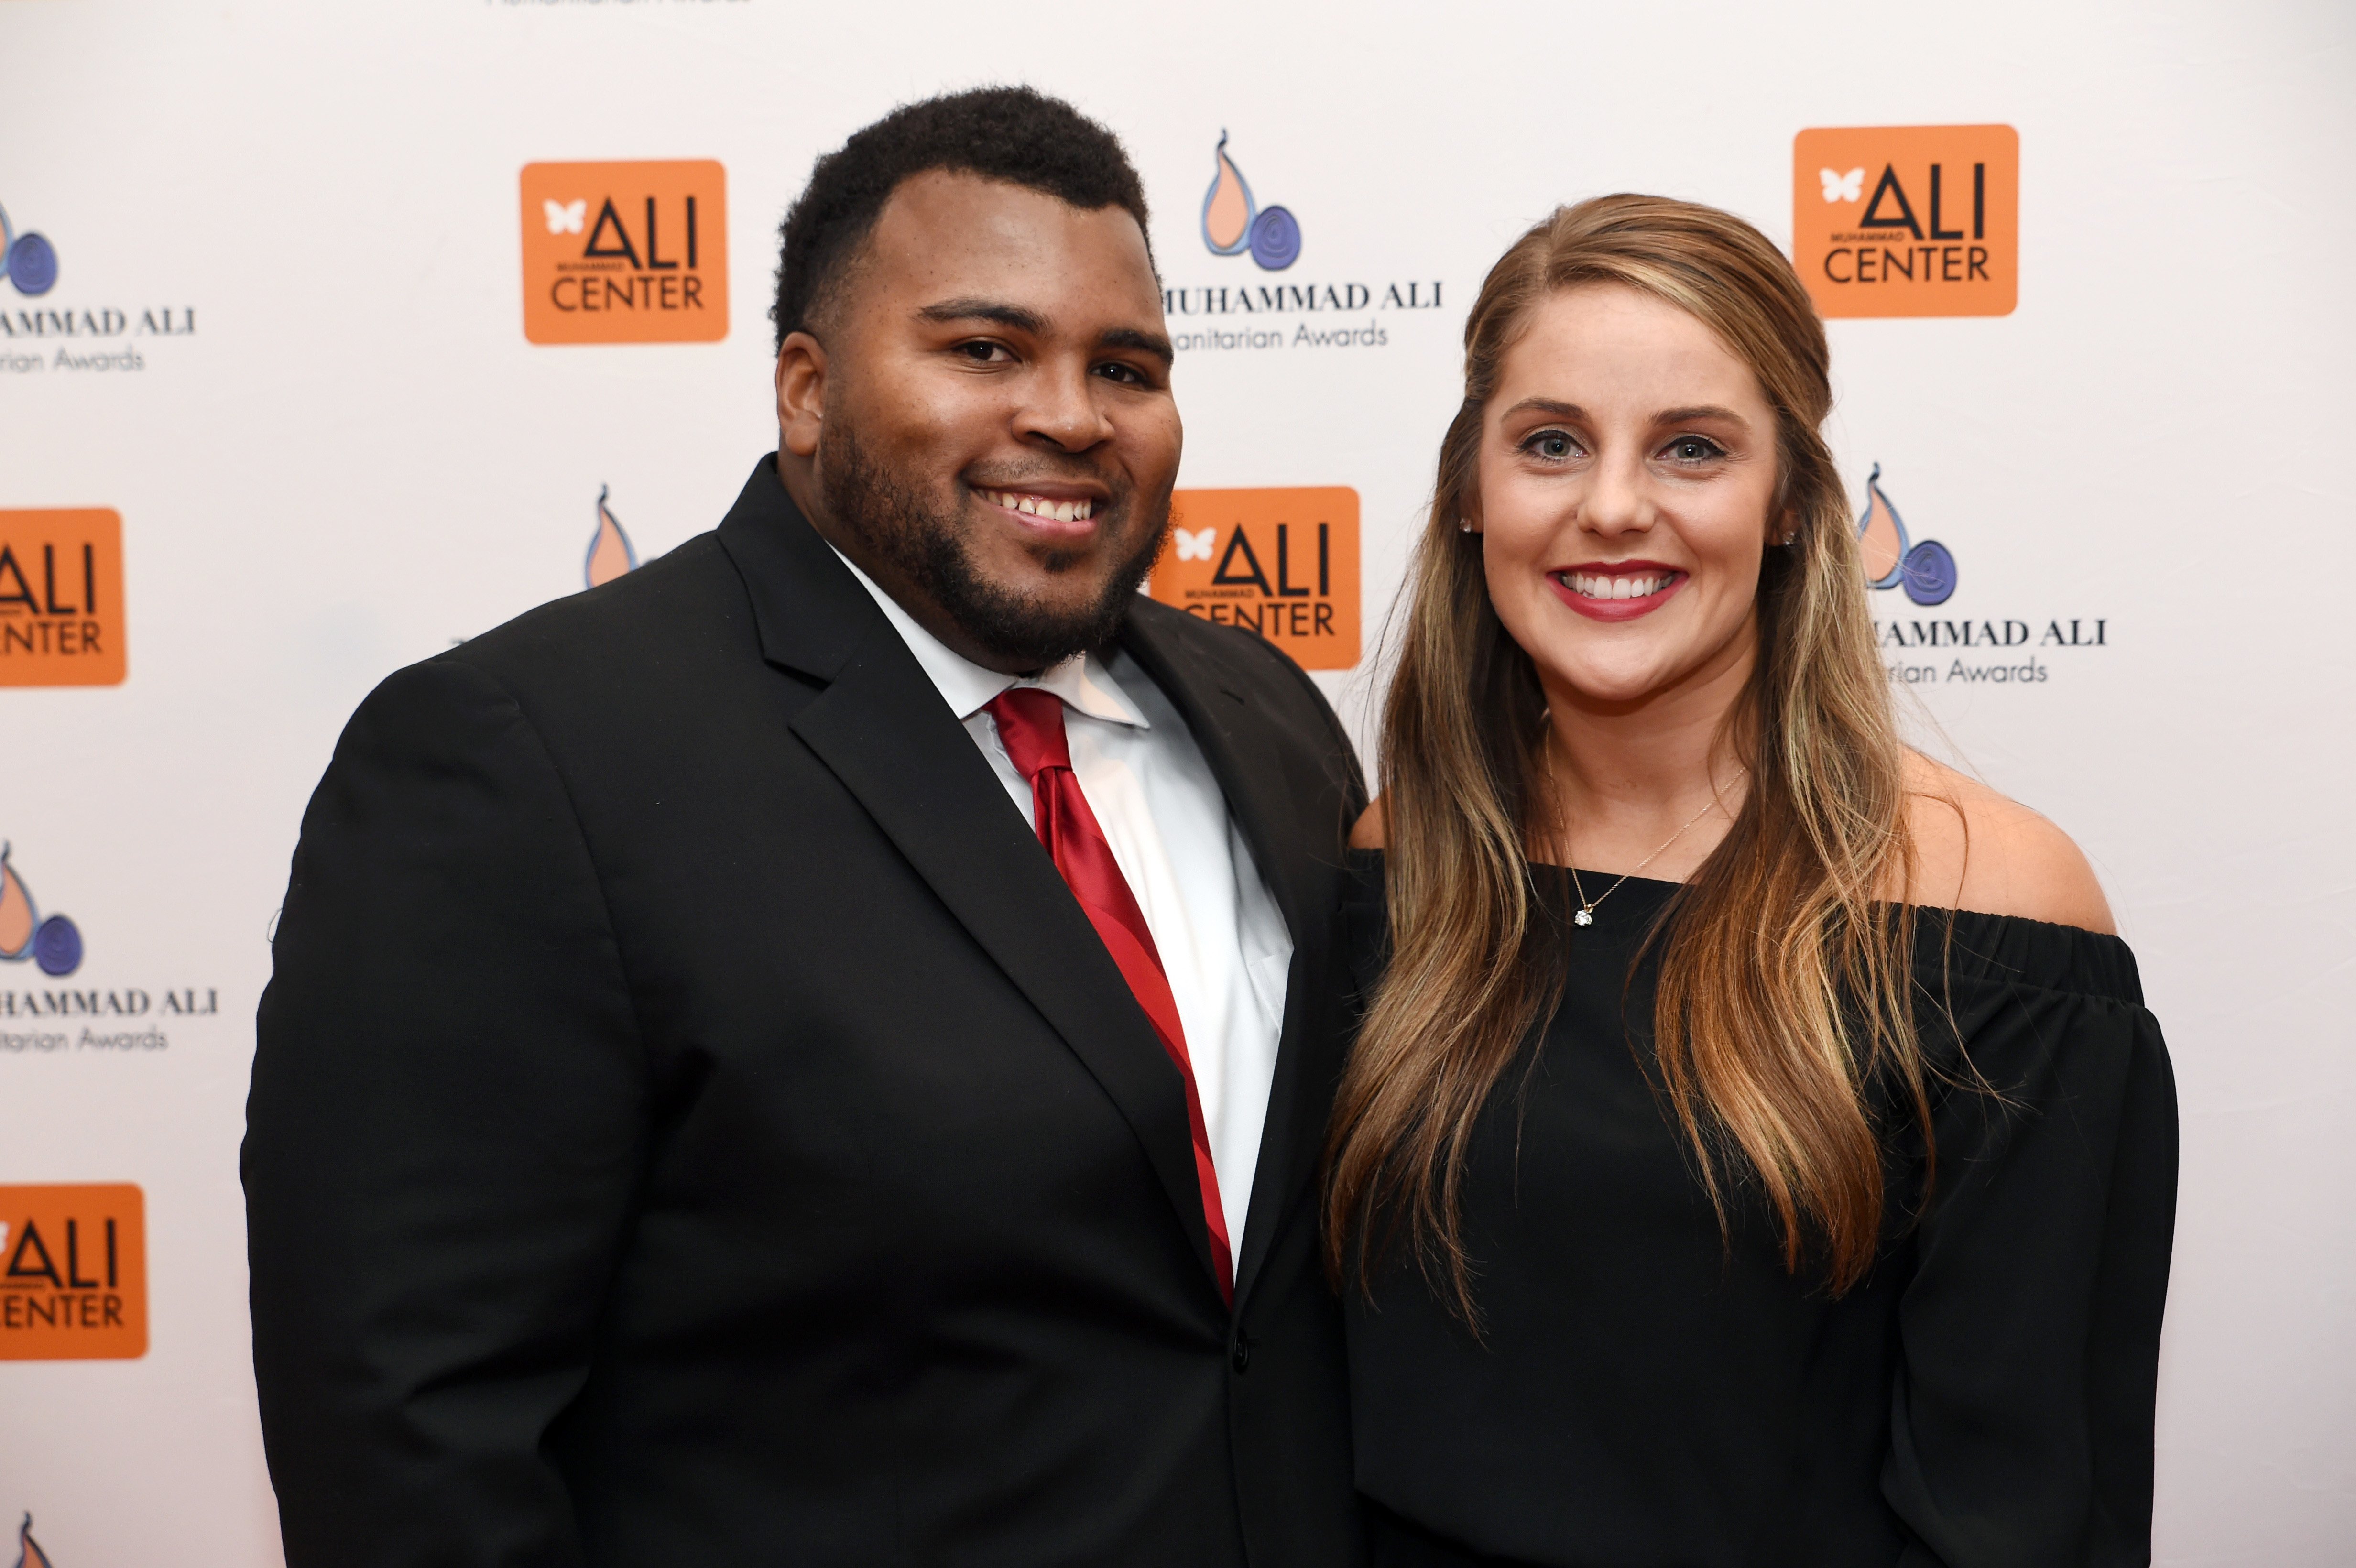 Asaad Ali and Rachel Ali attends the 7th Annual Muhammad Ali Humanitarian Awards at Downtown Marriott on September 12, 2019, in Louisville, Kentucky. | Source: Getty Images